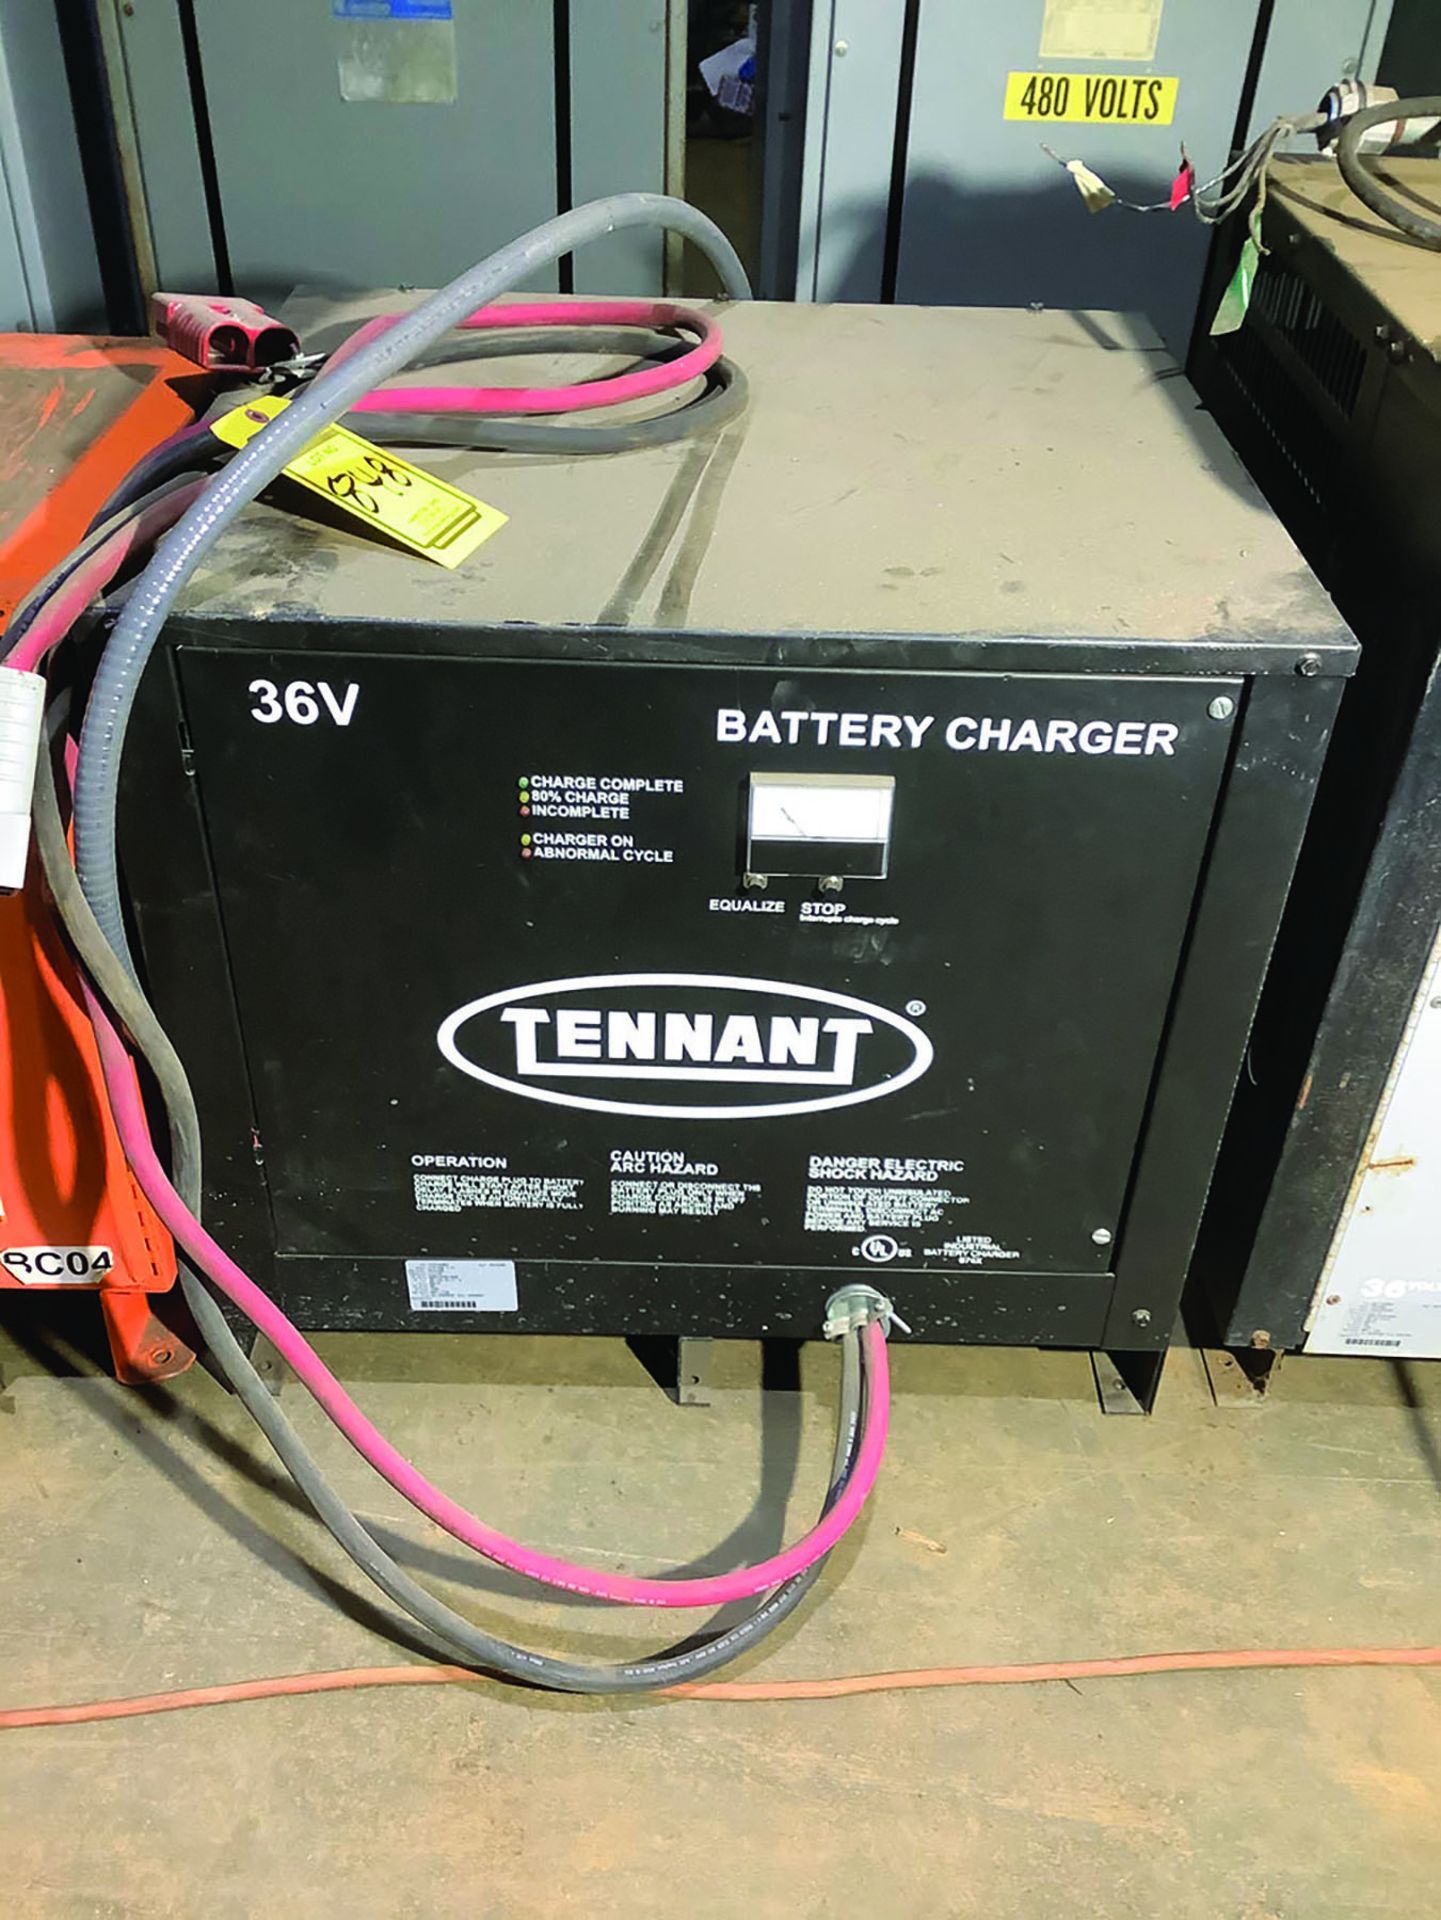 TENNANT MODEL J18 150-T-M 36 VOLT BATTERY CHARGER - Image 2 of 3